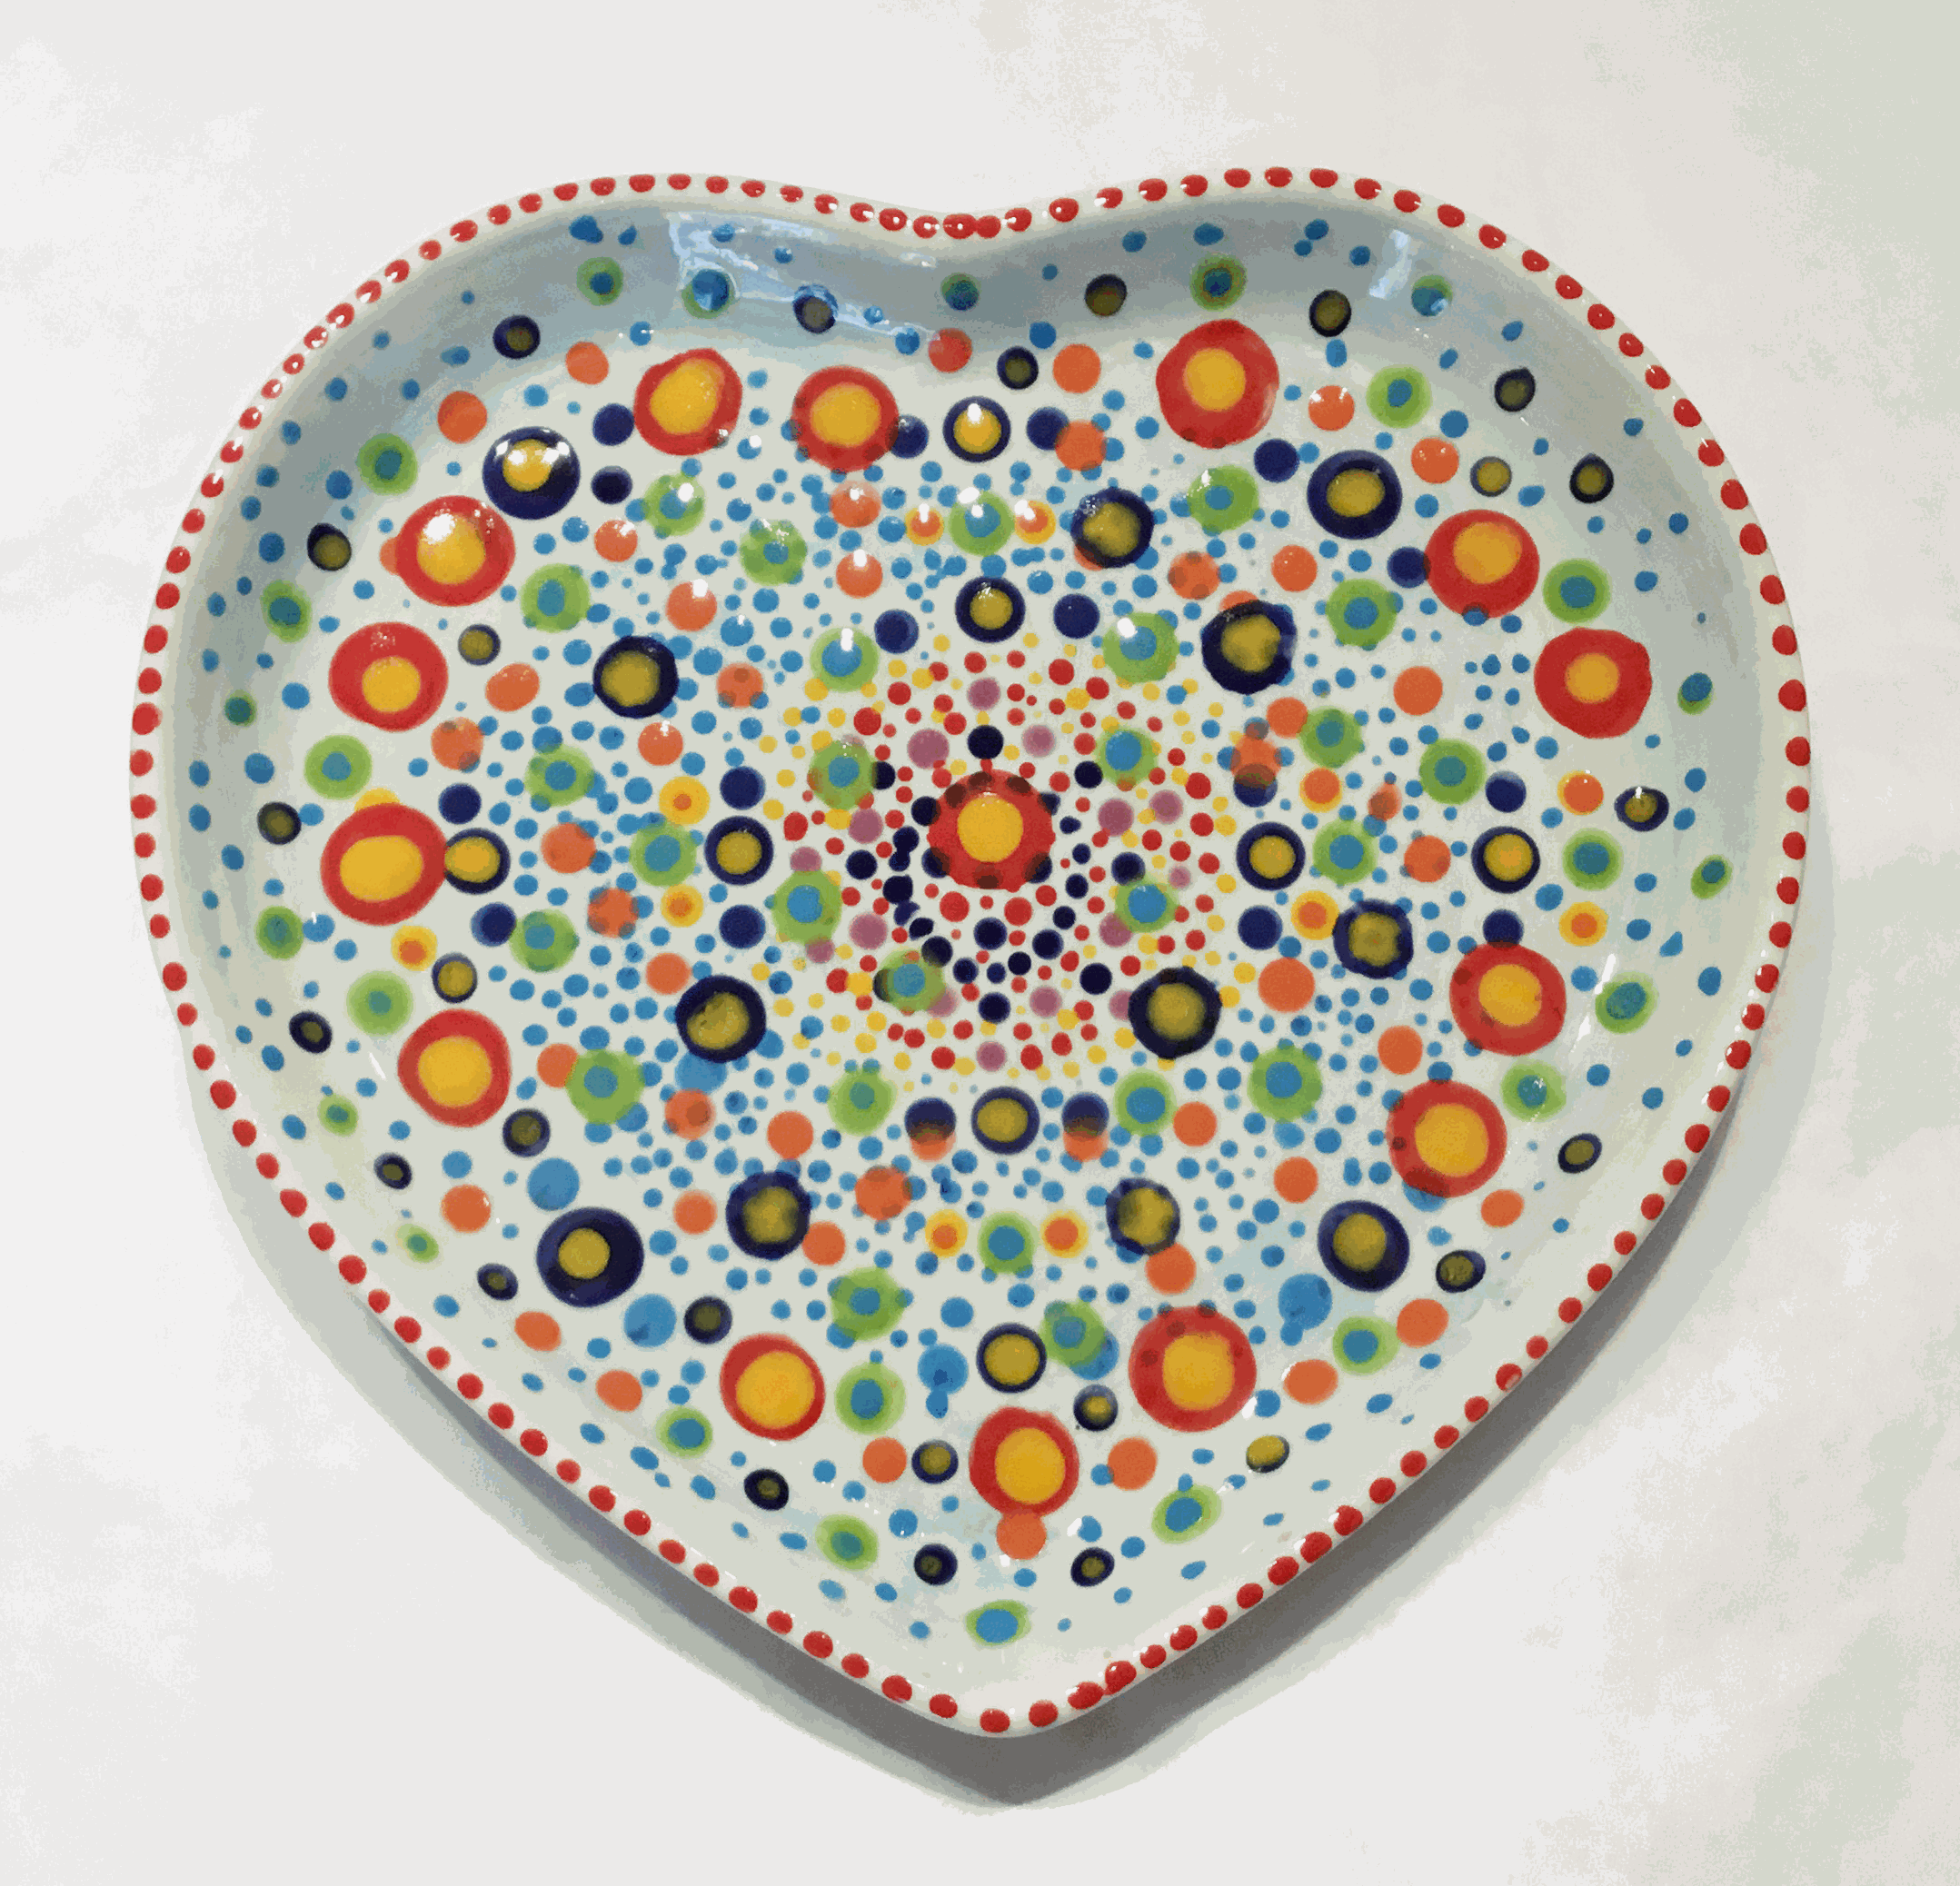 heart-home-decor-flower-pottery-painting